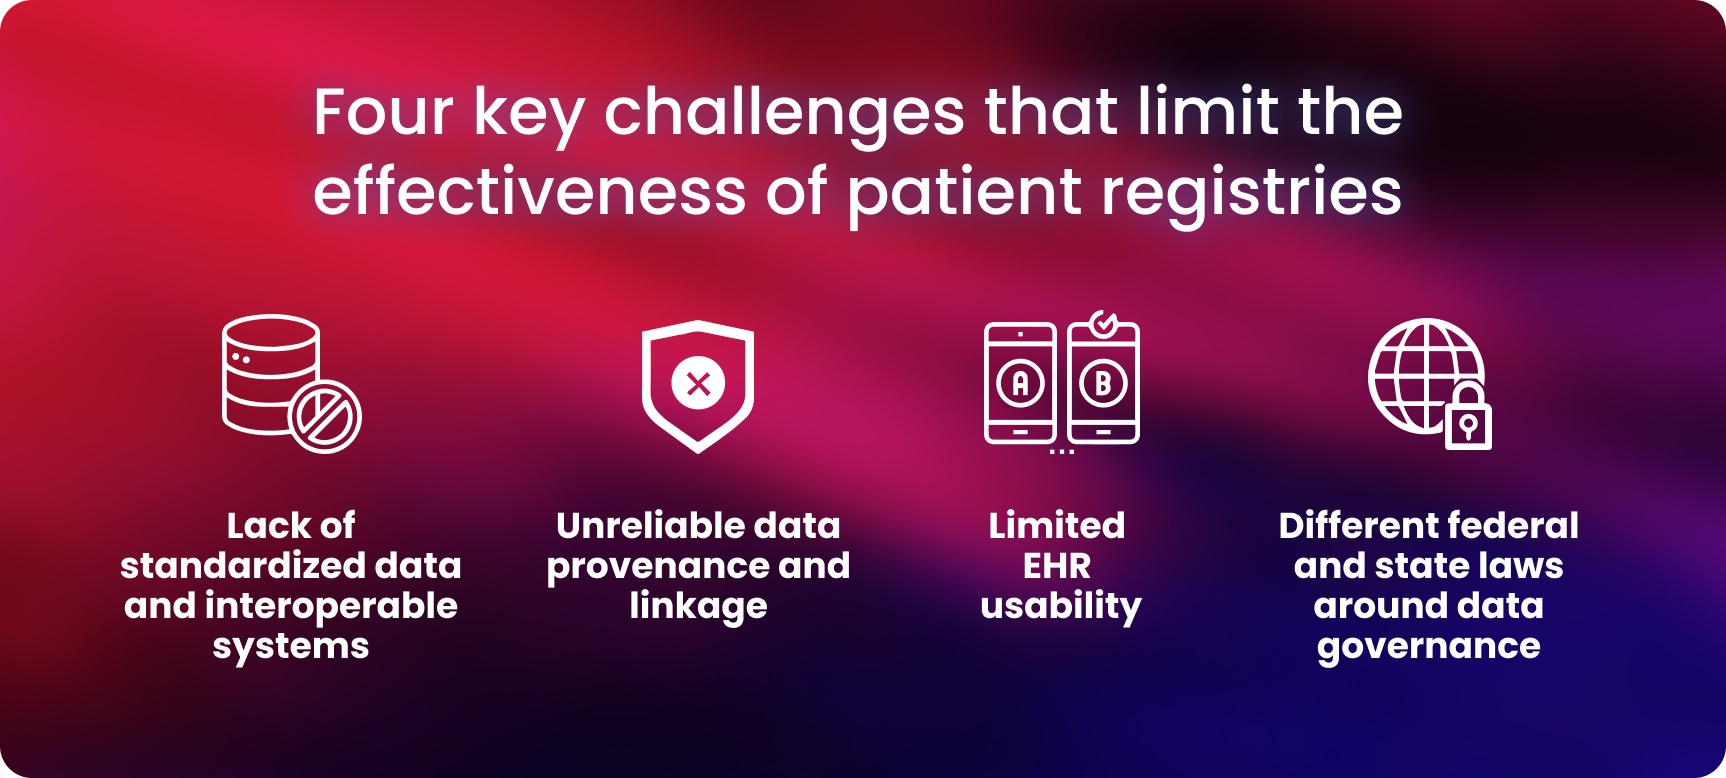 Challenges that limit the effectiveness of patient registries include unreliable data linkage, lack of standardized data, EHR usability  and laws around data governance